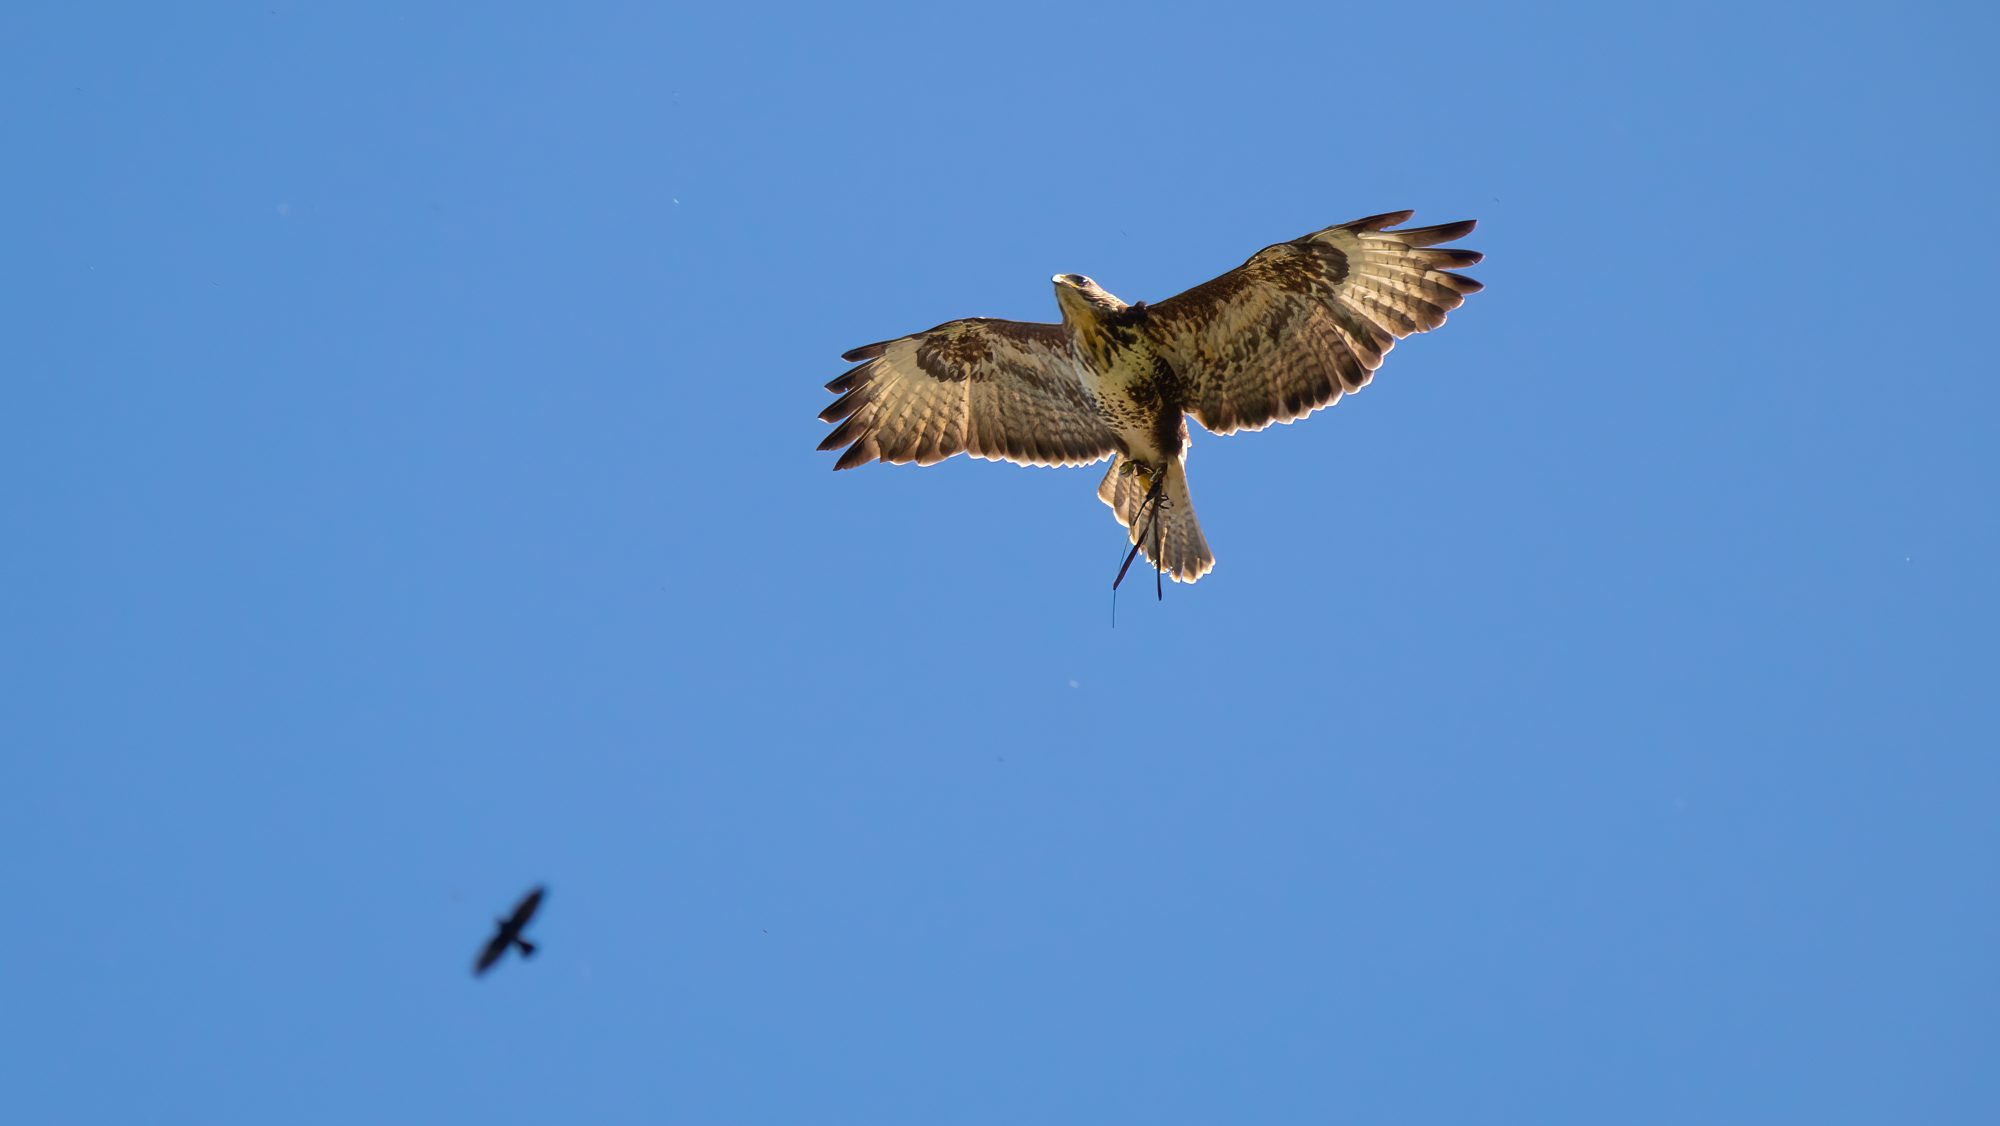 How to tell? Is it a Buzzard or a Red Kite?